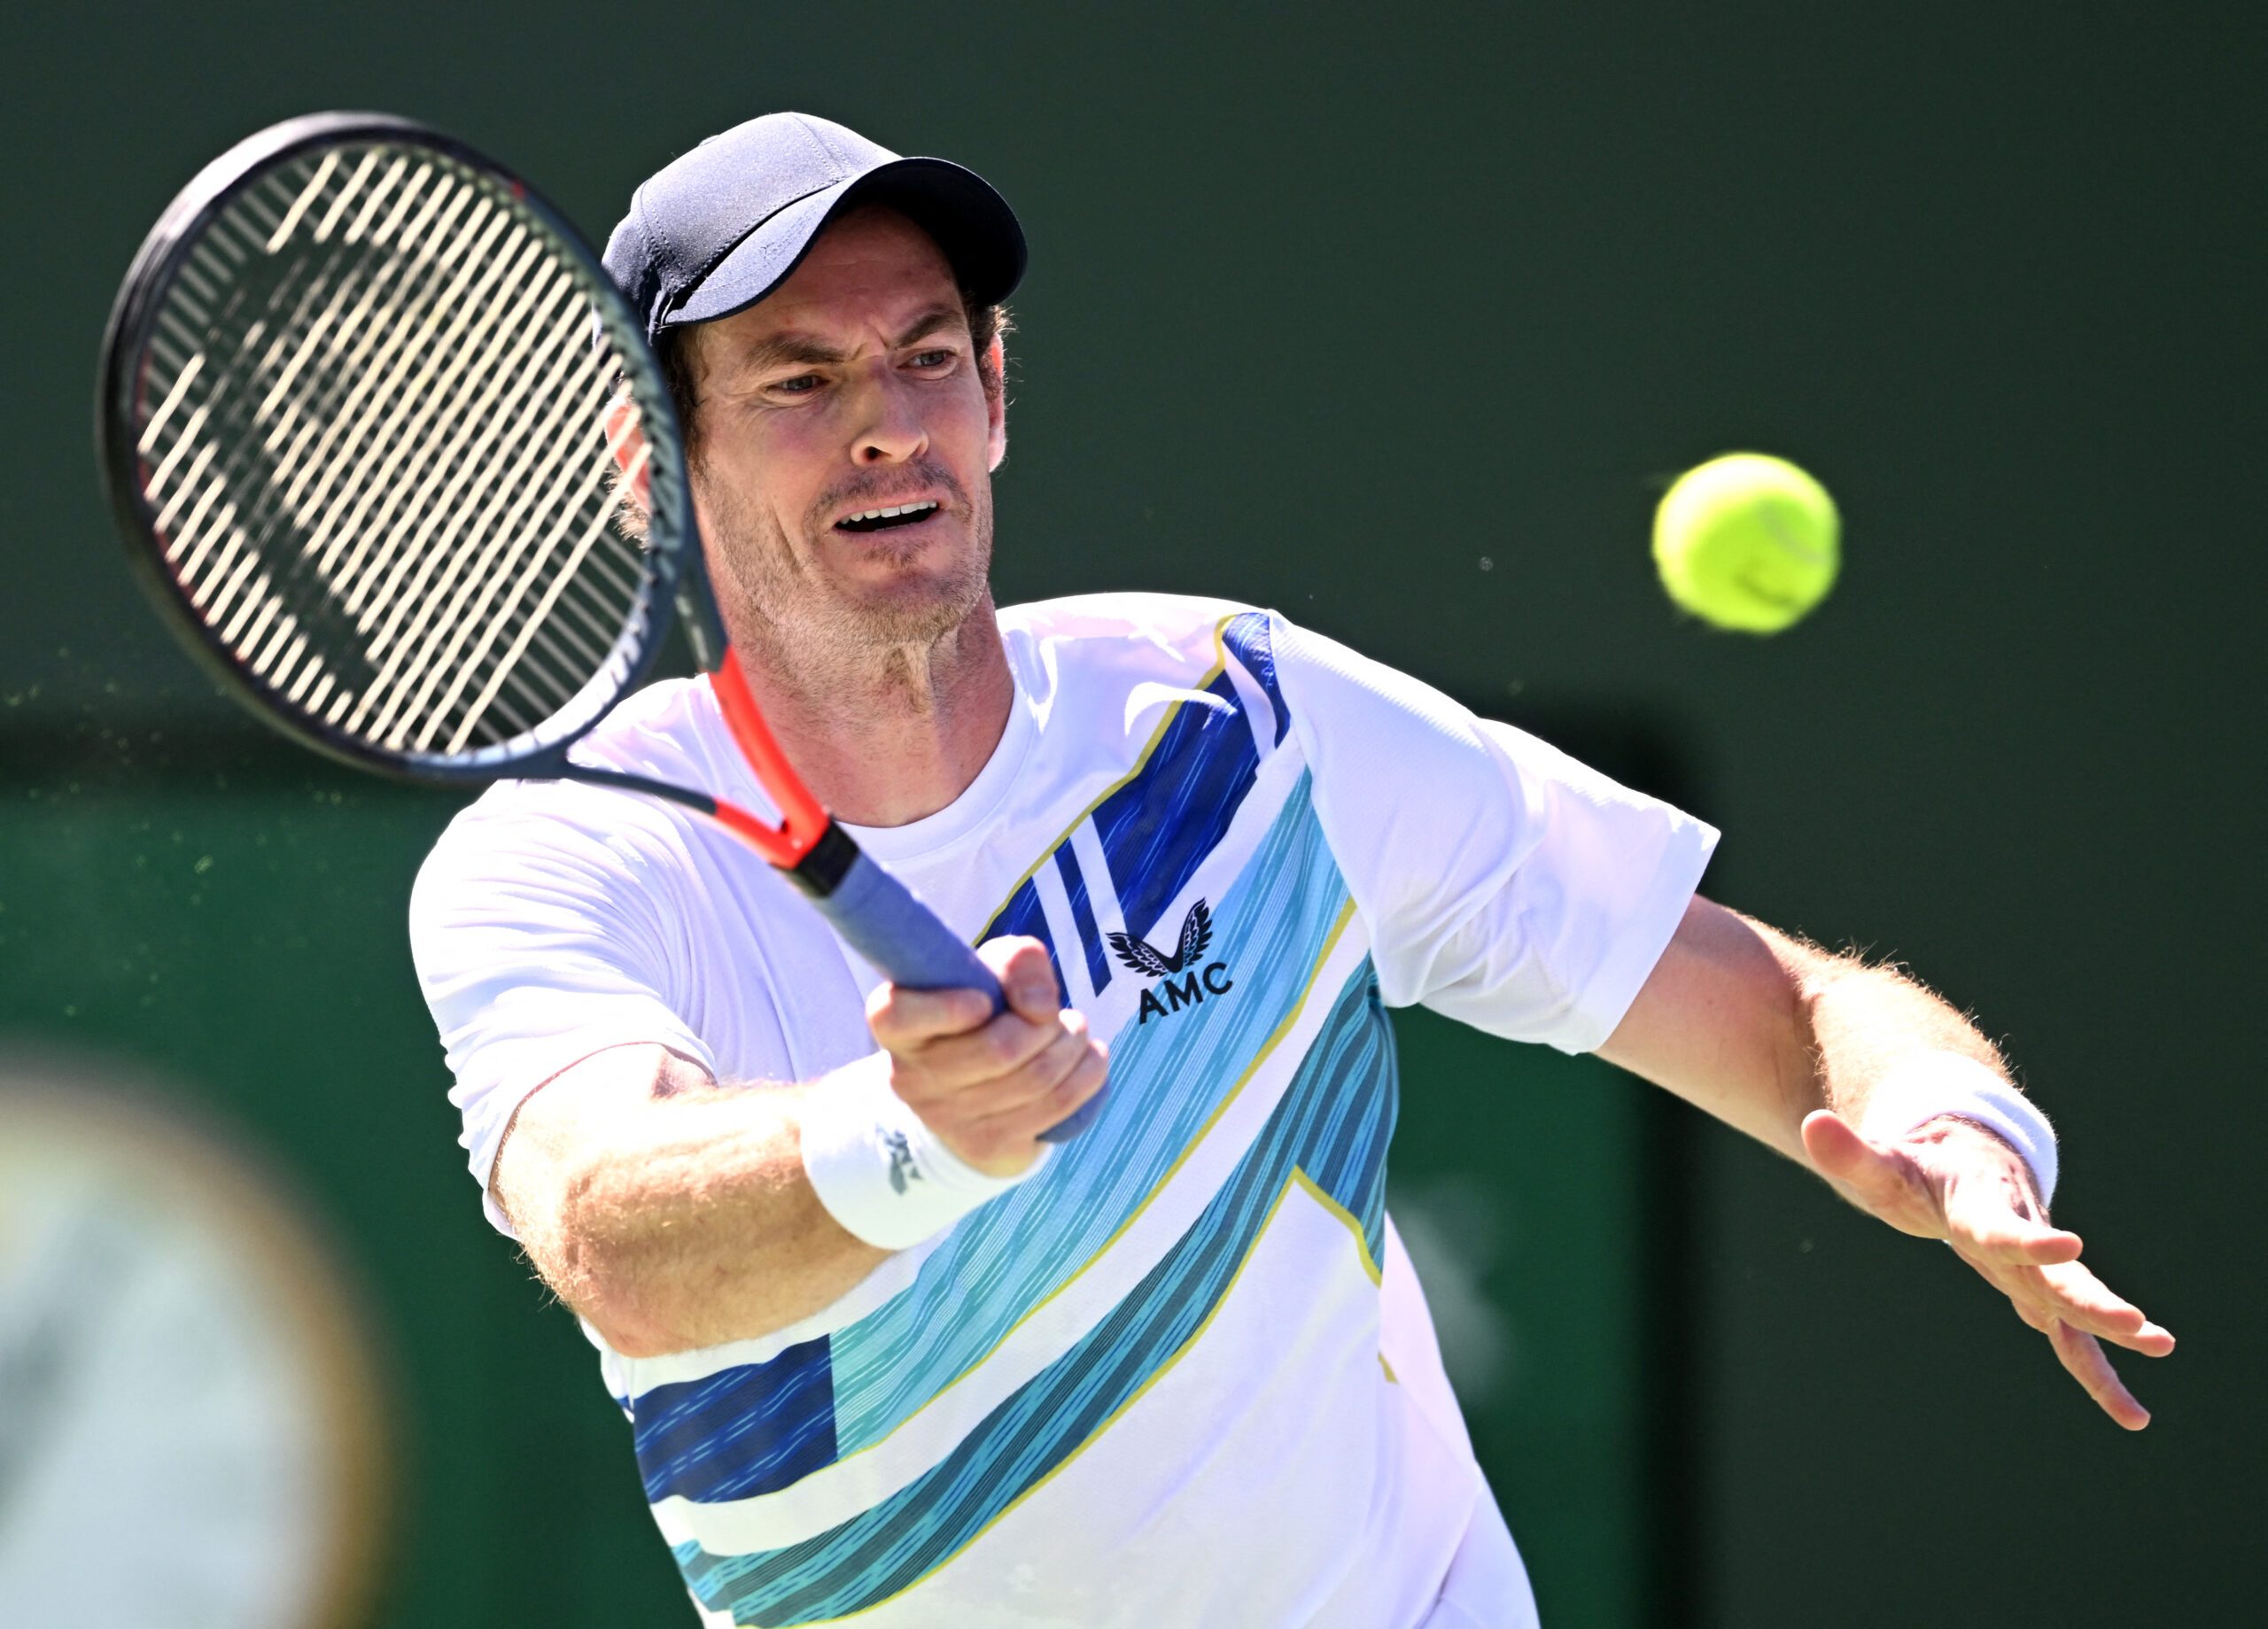 Andy Murray: Hecklers are an unfortunate part of sports